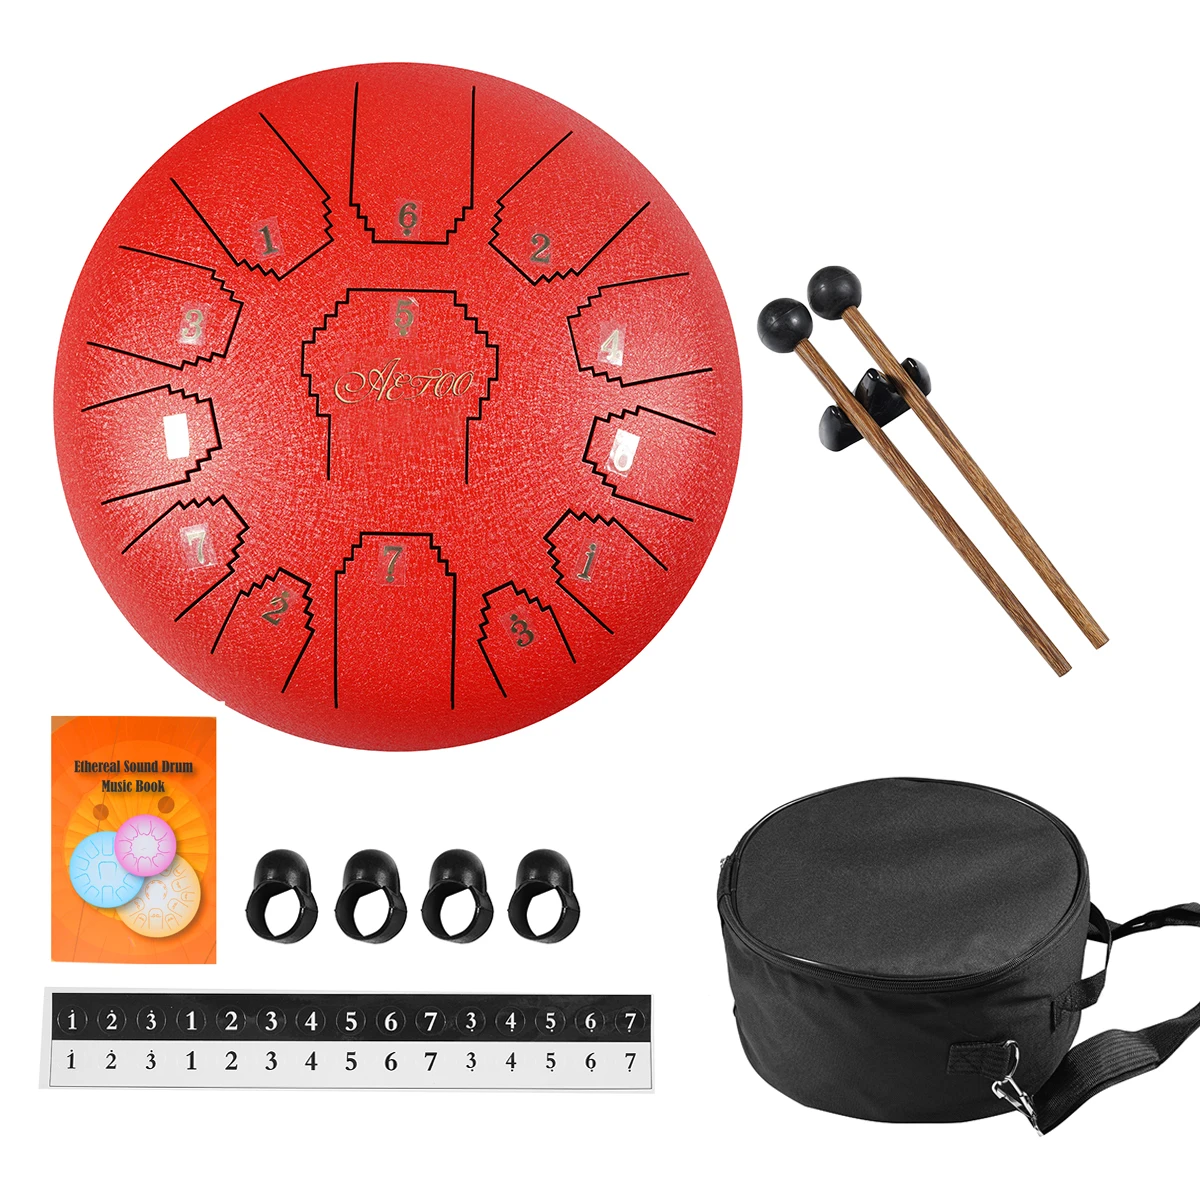 

12 Inch Mini Drum 11 Tone Steel Tongue Percussion Drum Handpan Instrument With A Carry Bag Musical Instruments, Purple